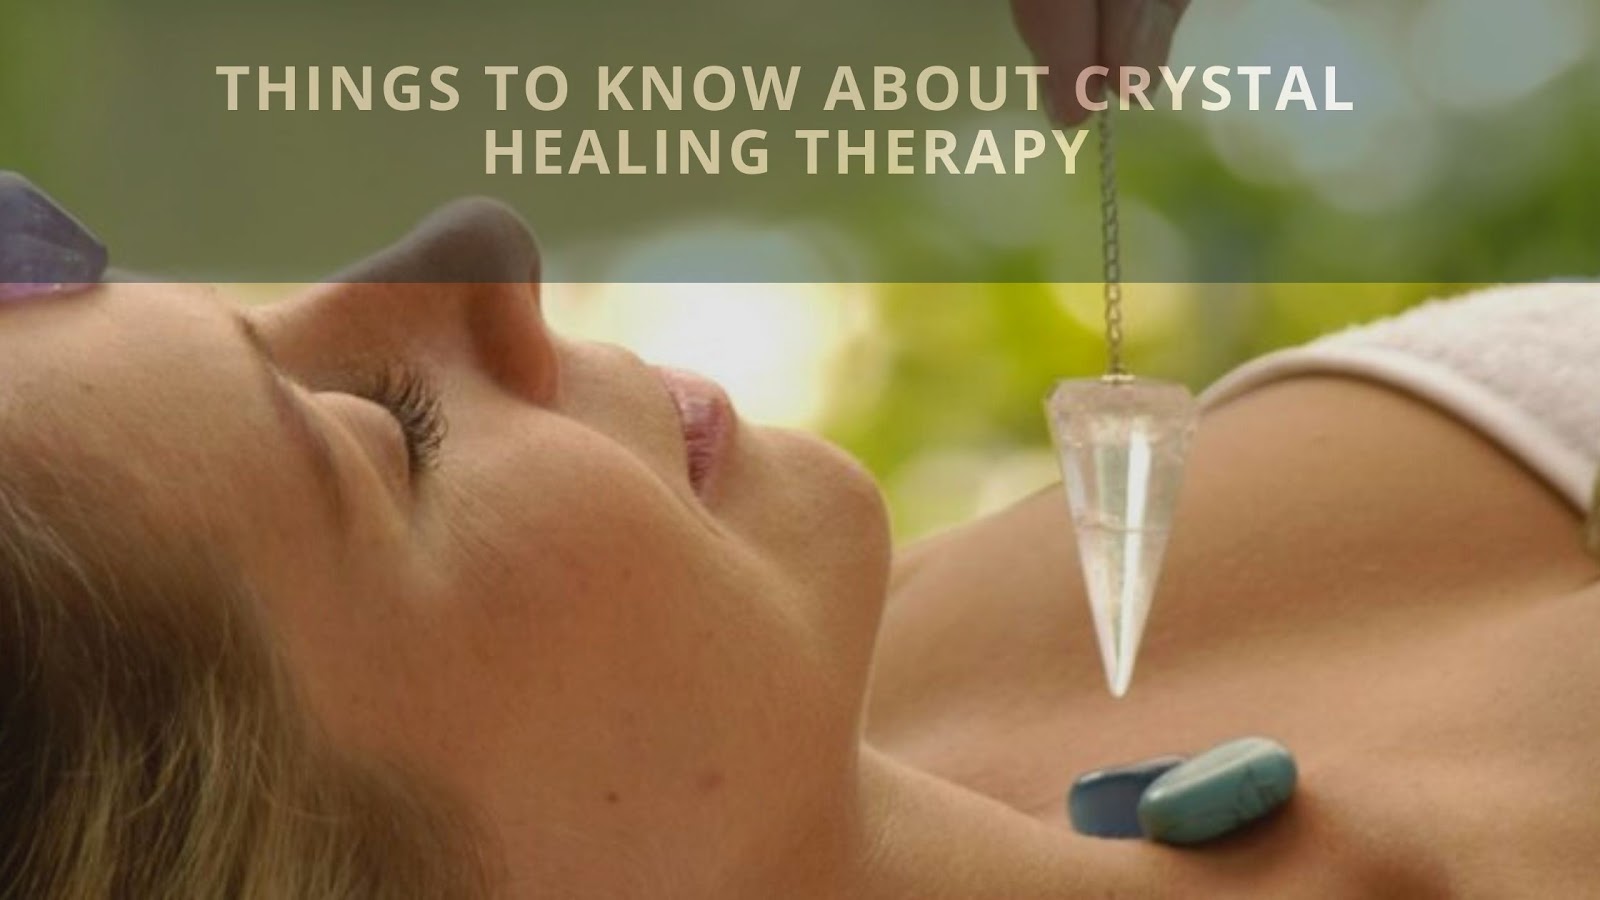 Crystal healing therapy